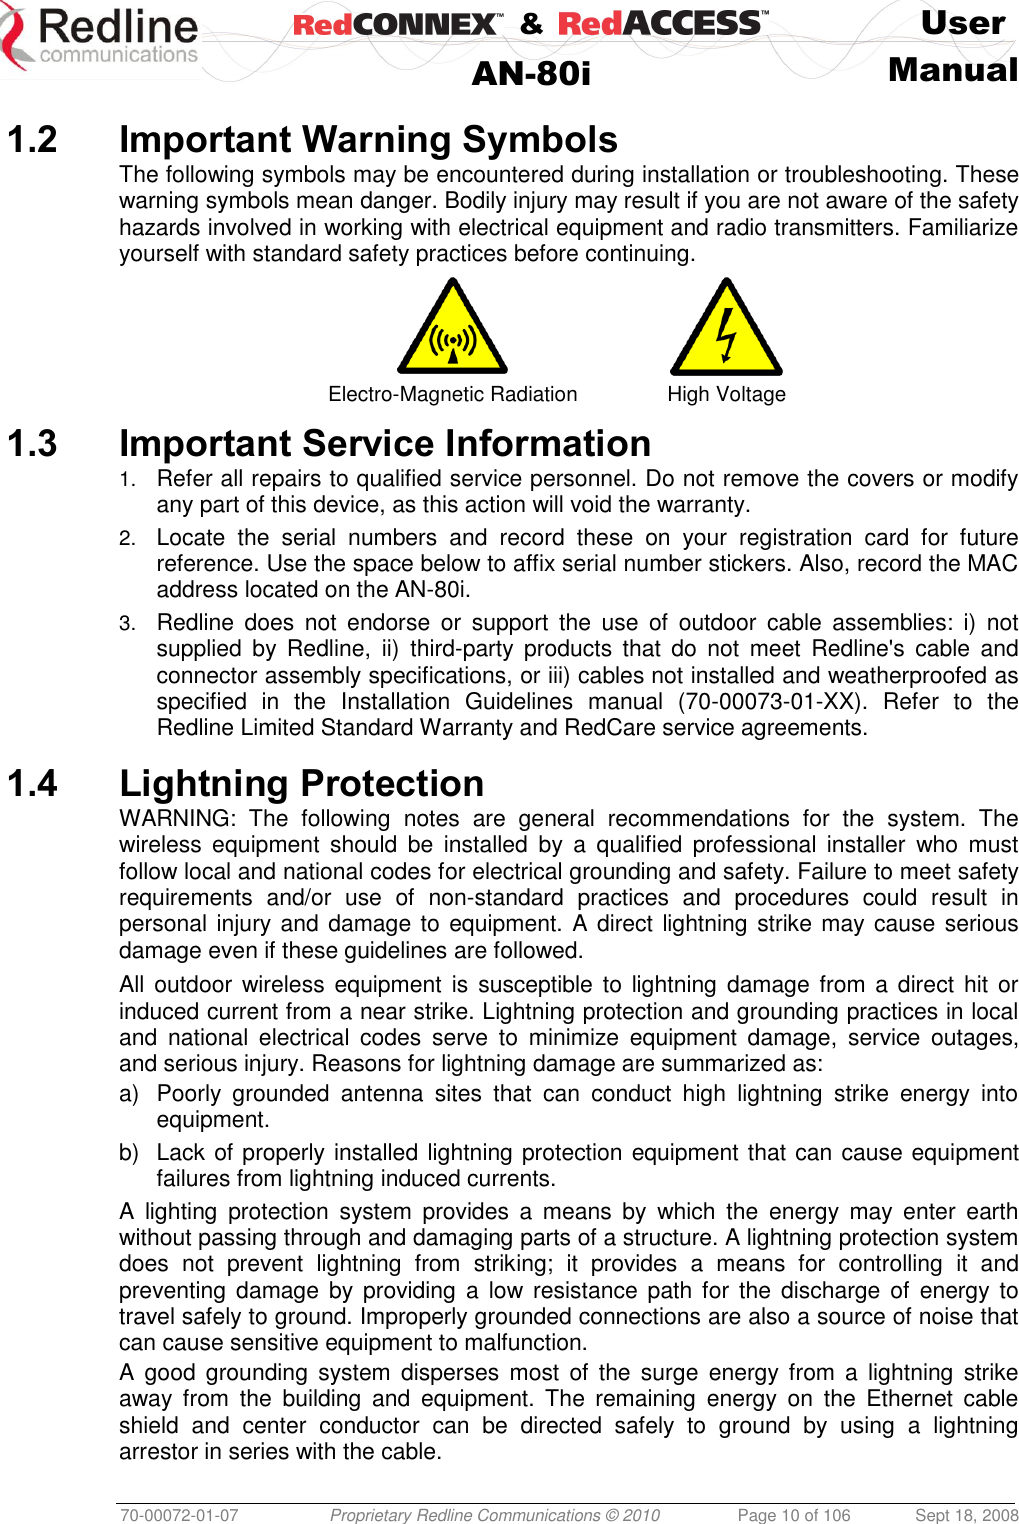    &amp;  User  AN-80i Manual  70-00072-01-07 Proprietary Redline Communications © 2010  Page 10 of 106  Sept 18, 2008  1.2 Important Warning Symbols The following symbols may be encountered during installation or troubleshooting. These warning symbols mean danger. Bodily injury may result if you are not aware of the safety hazards involved in working with electrical equipment and radio transmitters. Familiarize yourself with standard safety practices before continuing.   Electro-Magnetic Radiation High Voltage 1.3 Important Service Information 1. Refer all repairs to qualified service personnel. Do not remove the covers or modify any part of this device, as this action will void the warranty. 2. Locate  the  serial  numbers  and  record  these  on  your  registration  card  for  future reference. Use the space below to affix serial number stickers. Also, record the MAC address located on the AN-80i. 3. Redline  does  not  endorse  or  support  the  use  of  outdoor  cable  assemblies:  i)  not supplied  by  Redline,  ii)  third-party  products  that  do  not  meet  Redline&apos;s  cable  and connector assembly specifications, or iii) cables not installed and weatherproofed as specified  in  the  Installation  Guidelines  manual  (70-00073-01-XX).  Refer  to  the Redline Limited Standard Warranty and RedCare service agreements.  1.4 Lightning Protection WARNING:  The  following  notes  are  general  recommendations  for  the  system.  The wireless  equipment  should  be  installed  by  a  qualified  professional  installer  who  must follow local and national codes for electrical grounding and safety. Failure to meet safety requirements  and/or  use  of  non-standard  practices  and  procedures  could  result  in personal injury and damage to equipment. A direct lightning strike may cause serious damage even if these guidelines are followed. All outdoor wireless equipment is susceptible to lightning  damage from  a direct hit or induced current from a near strike. Lightning protection and grounding practices in local and  national  electrical  codes  serve  to  minimize  equipment  damage,  service  outages, and serious injury. Reasons for lightning damage are summarized as: a)  Poorly  grounded  antenna  sites  that  can  conduct  high  lightning  strike  energy  into equipment. b)  Lack of properly installed lightning protection equipment that can cause equipment failures from lightning induced currents. A  lighting  protection  system  provides  a  means  by  which  the  energy  may  enter  earth without passing through and damaging parts of a structure. A lightning protection system does  not  prevent  lightning  from  striking;  it  provides  a  means  for  controlling  it  and preventing damage by  providing a low resistance  path  for  the  discharge of energy  to travel safely to ground. Improperly grounded connections are also a source of noise that can cause sensitive equipment to malfunction. A  good  grounding  system disperses most of  the  surge  energy from  a  lightning  strike away  from  the  building  and  equipment.  The  remaining  energy  on  the  Ethernet  cable shield  and  center  conductor  can  be  directed  safely  to  ground  by  using  a  lightning arrestor in series with the cable. 